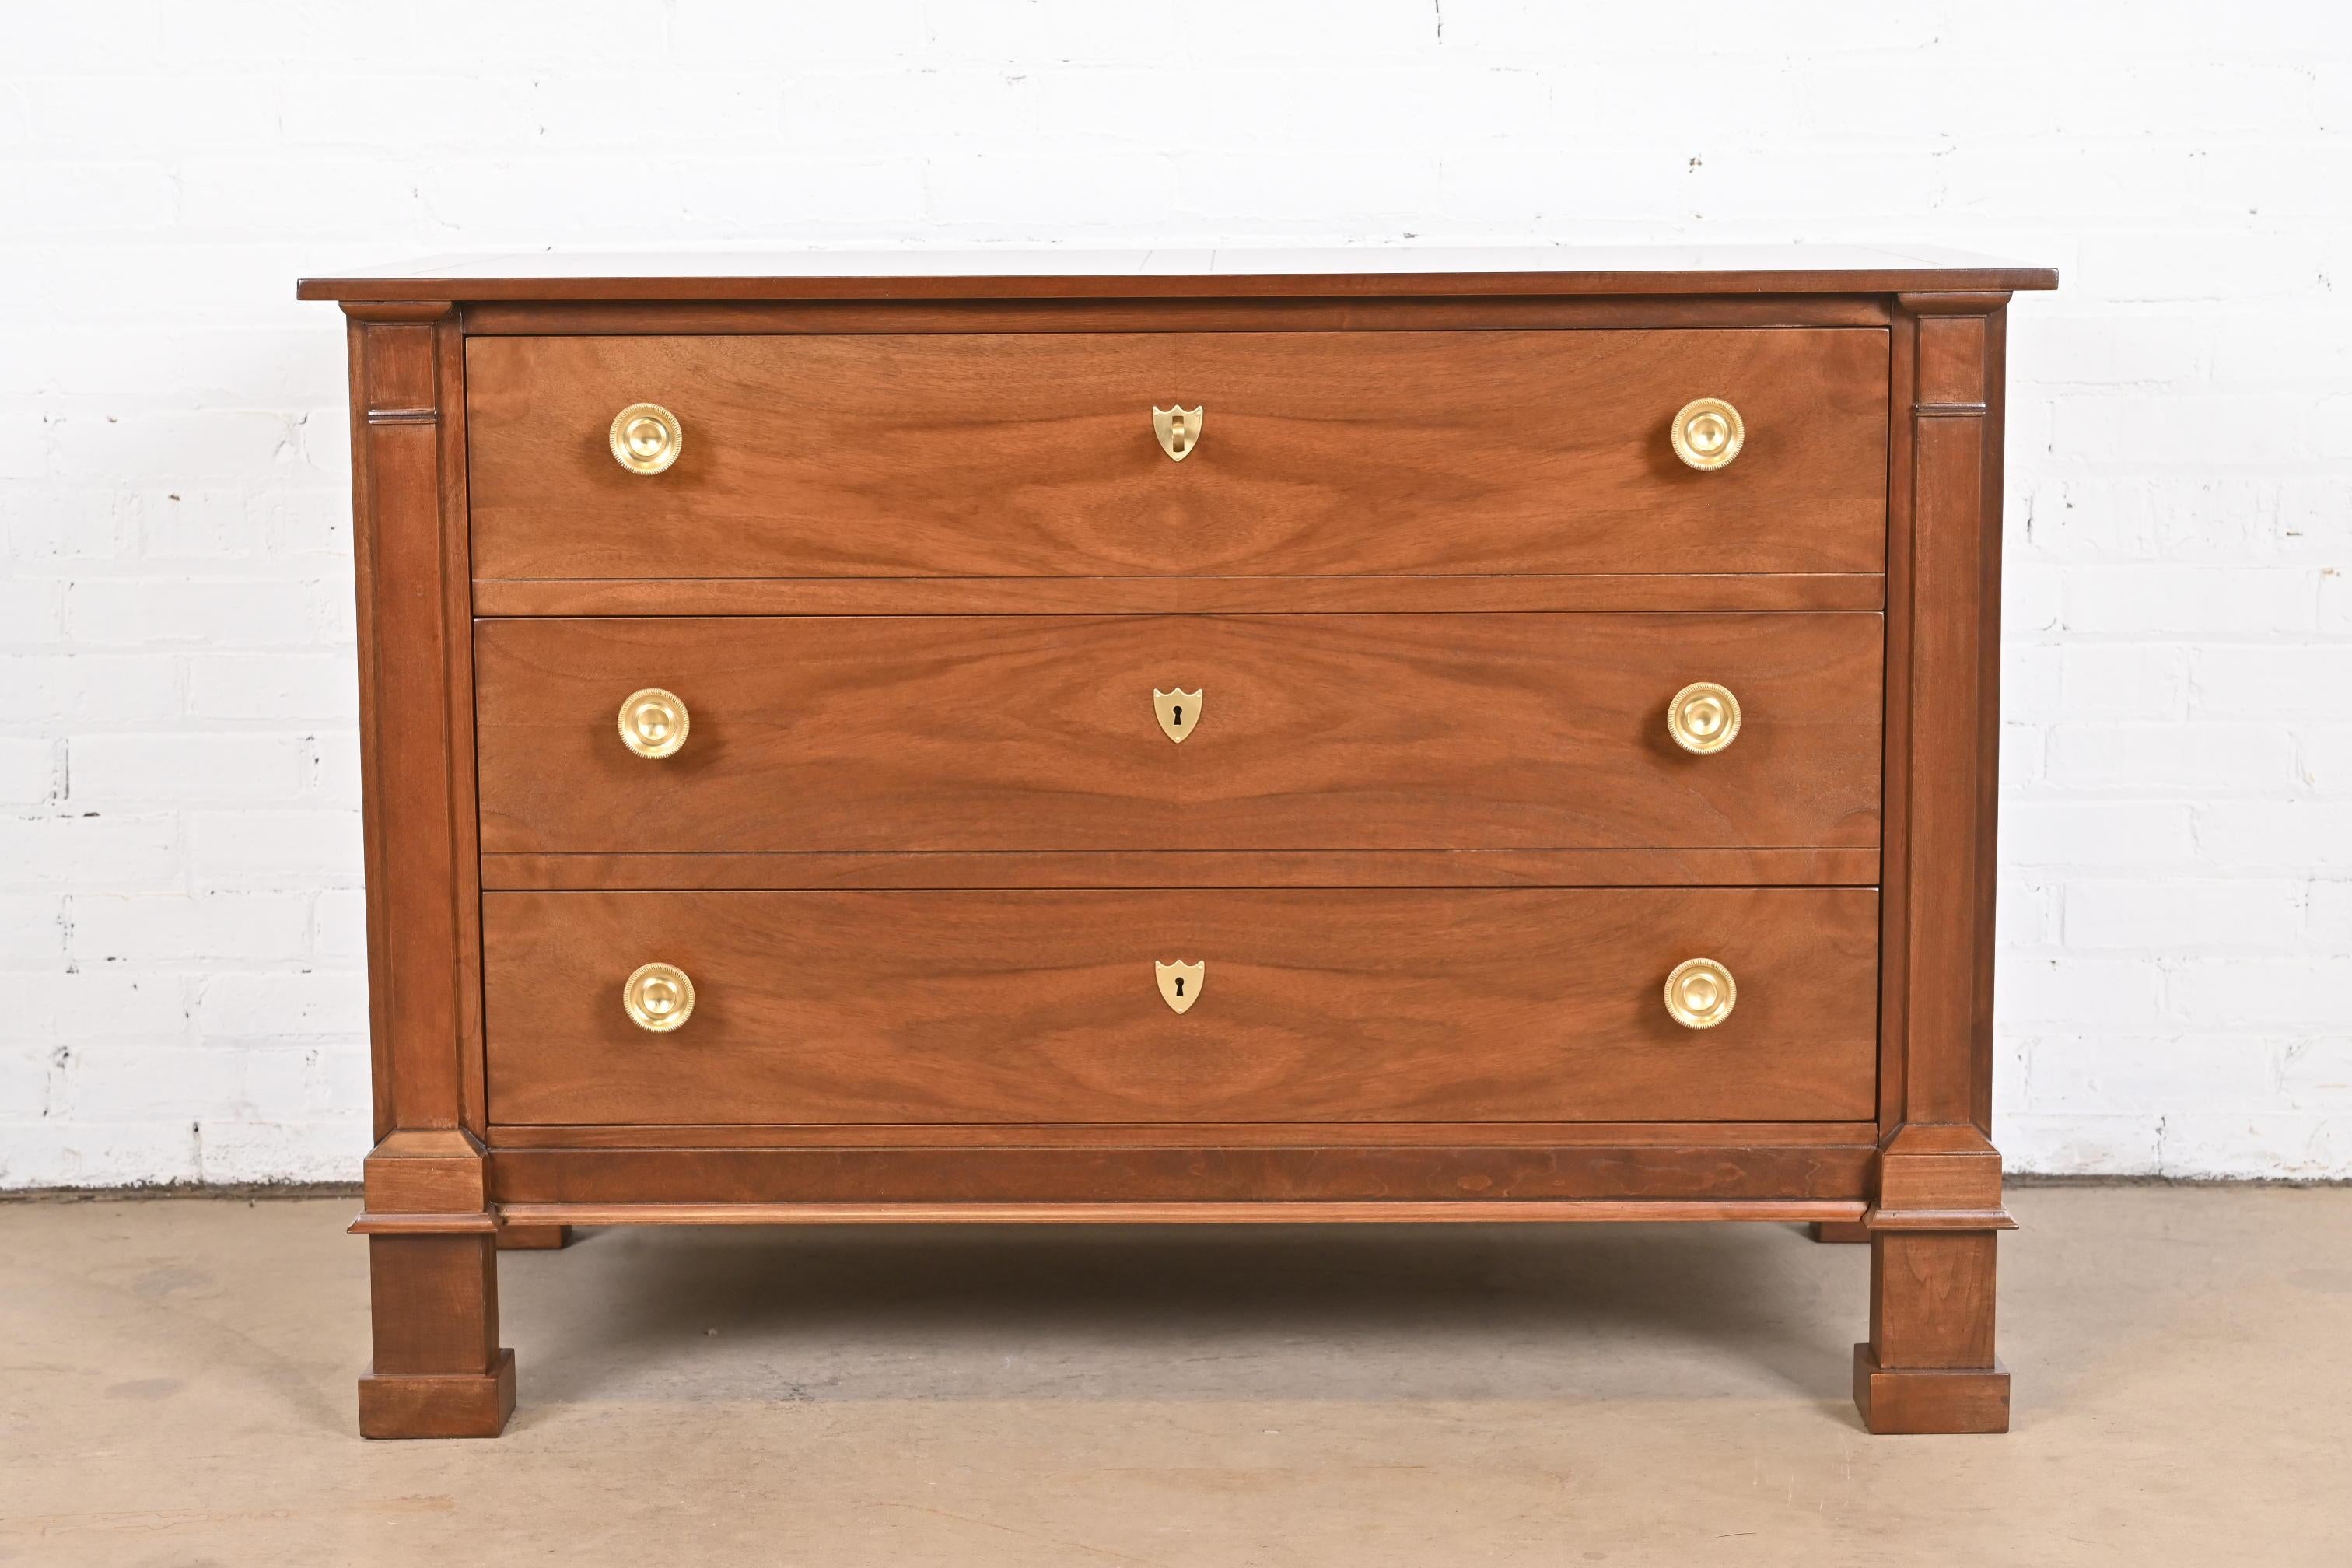 A beautiful Neoclassical or French Empire style three-drawer commode or chest of drawers

By Baker Furniture

USA, Circa 1980s

Gorgeous book-matched walnut, with burled walnut top and original brass hardware. Drawers lock, and key is